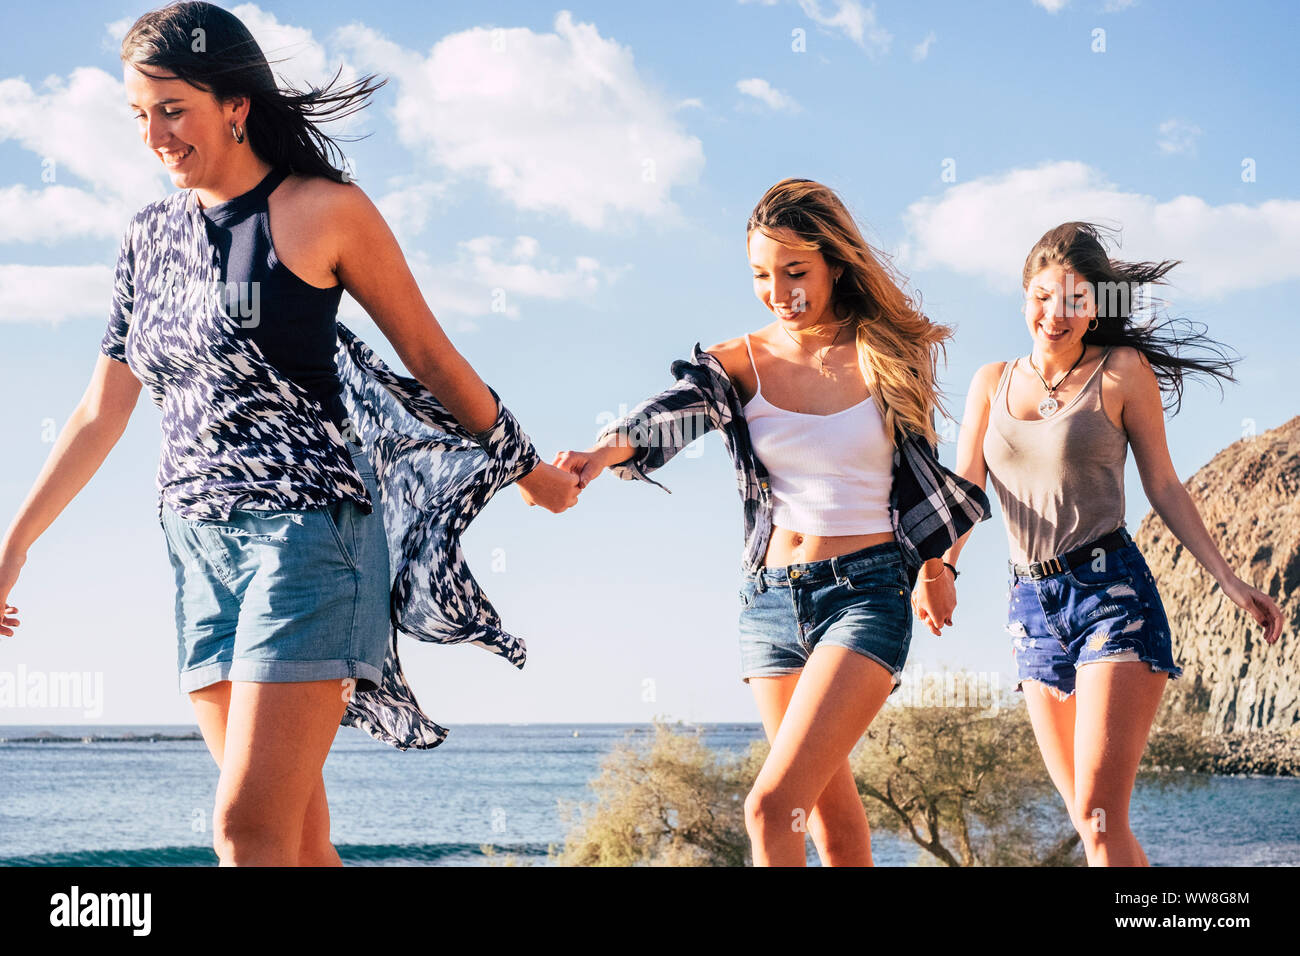 three young caucasian pretty girls walking together taking hands each other smiling and laughing, cheerful concept of happy women in outdoor leisure activity near the ocean and mountains Stock Photo